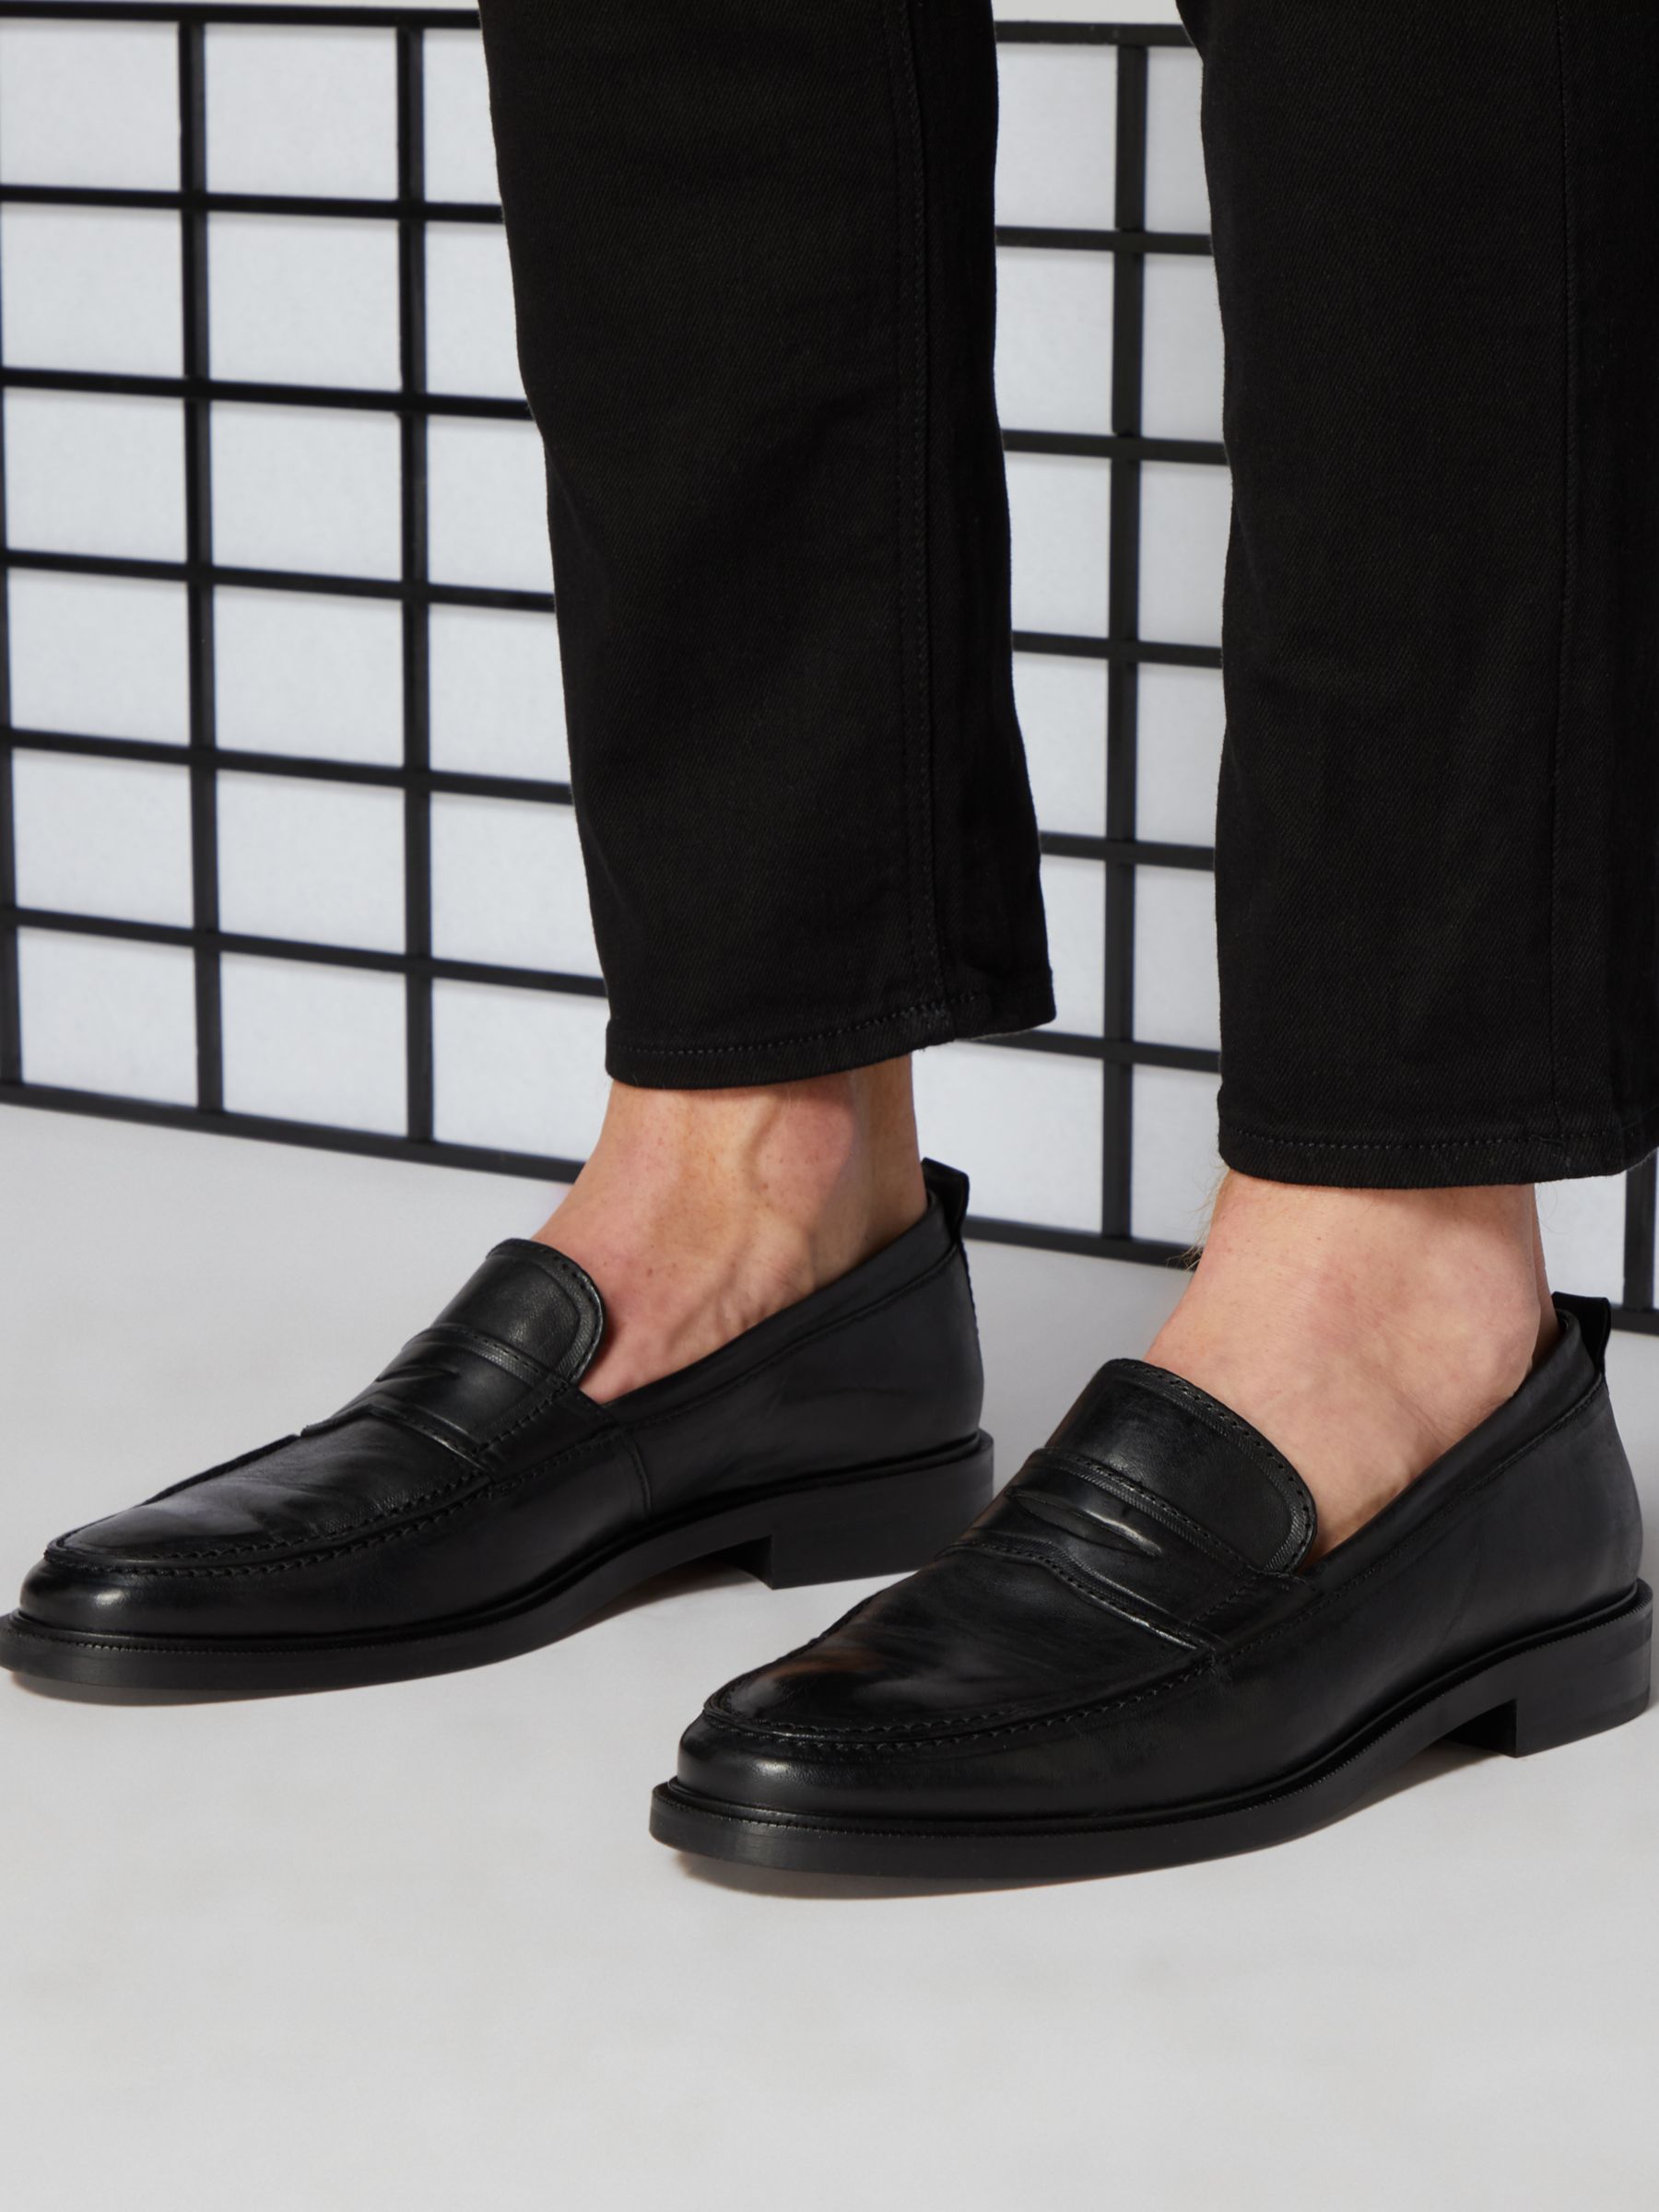 Bertie Songbird Leather Penny Loafers